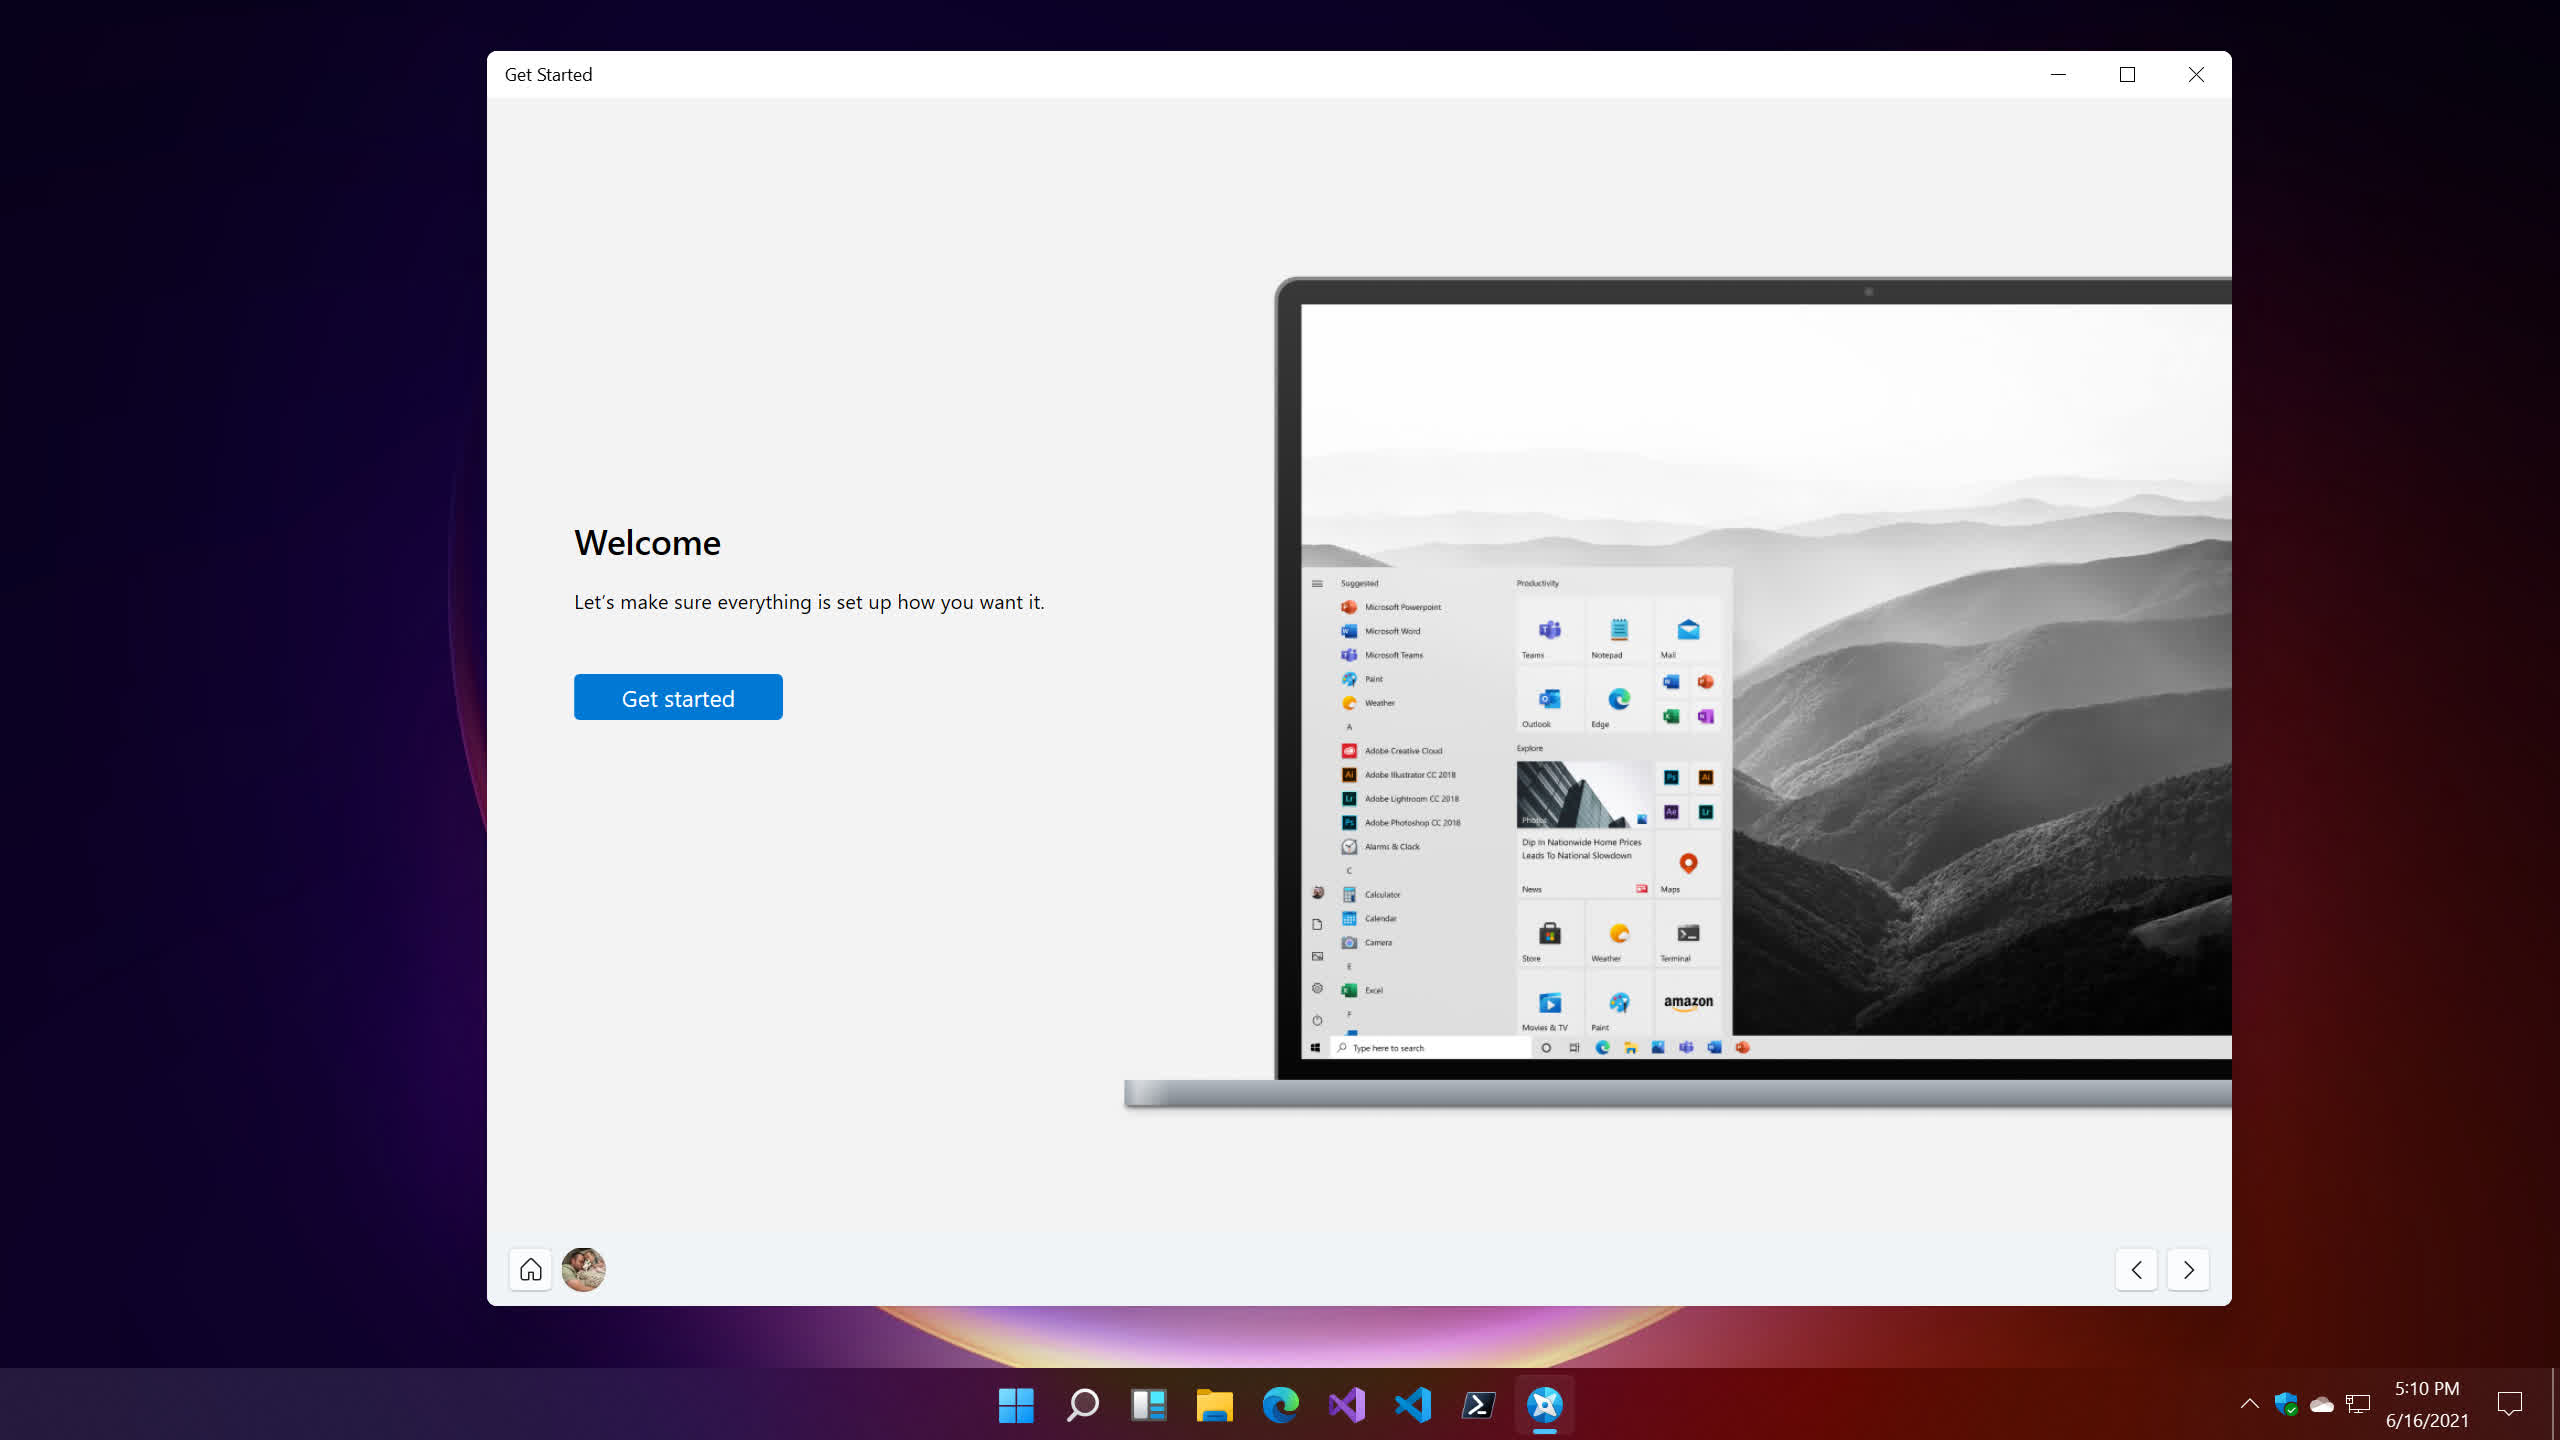 Windows 7 and 8 users might get a free upgrade path to Windows 11